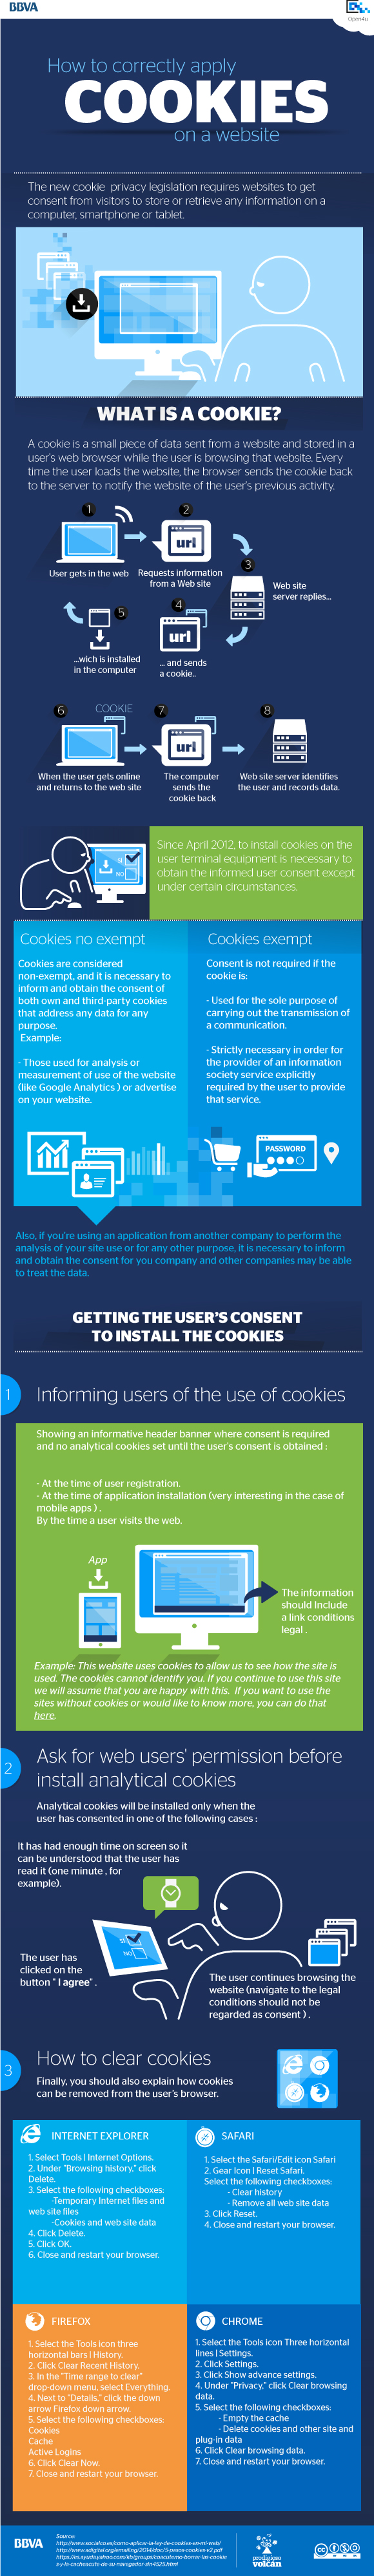 How to correctly apply cookies on a website